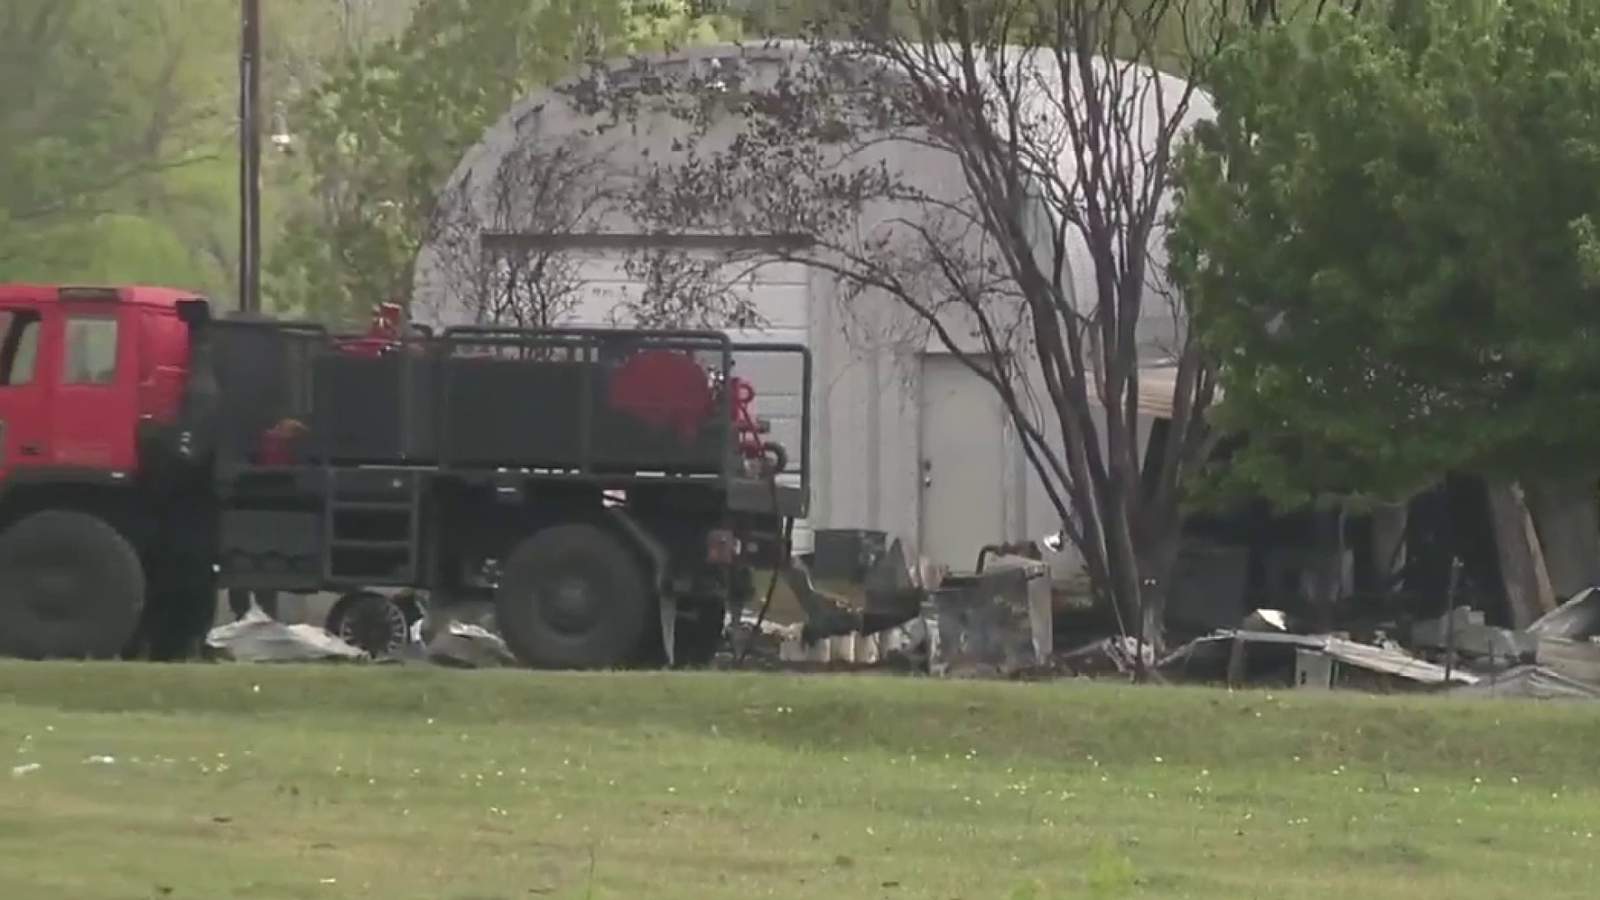 Human remains found in house fire in Lytle, officials say